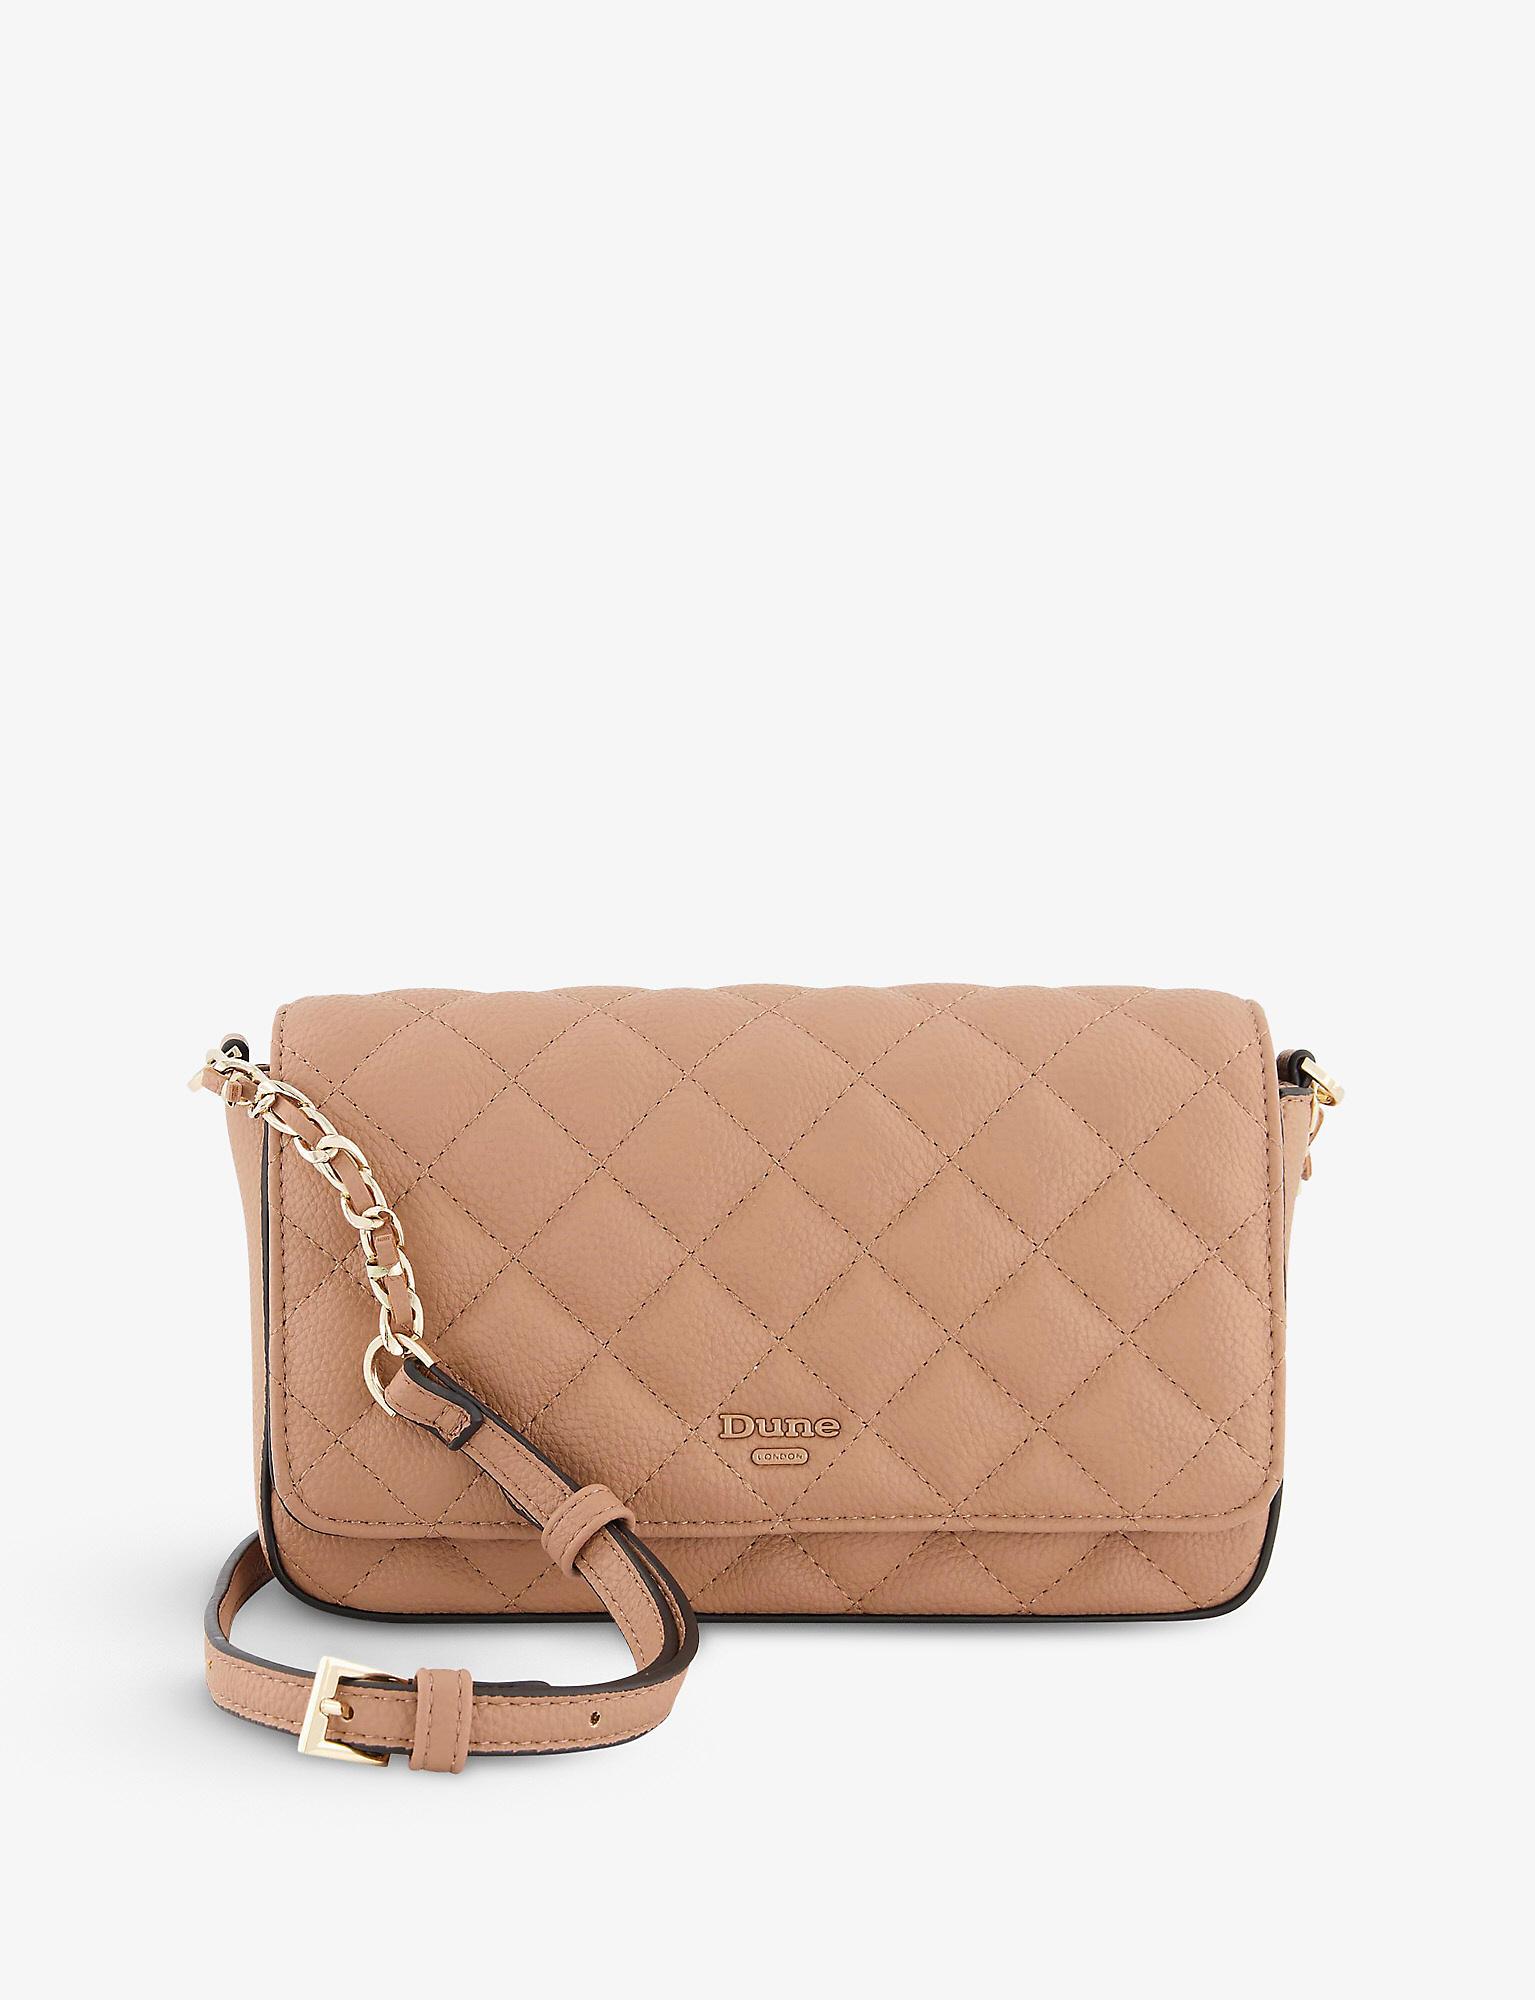 Dune Dupree Quilted Faux-leather Cross-body Bag in Natural | Lyst